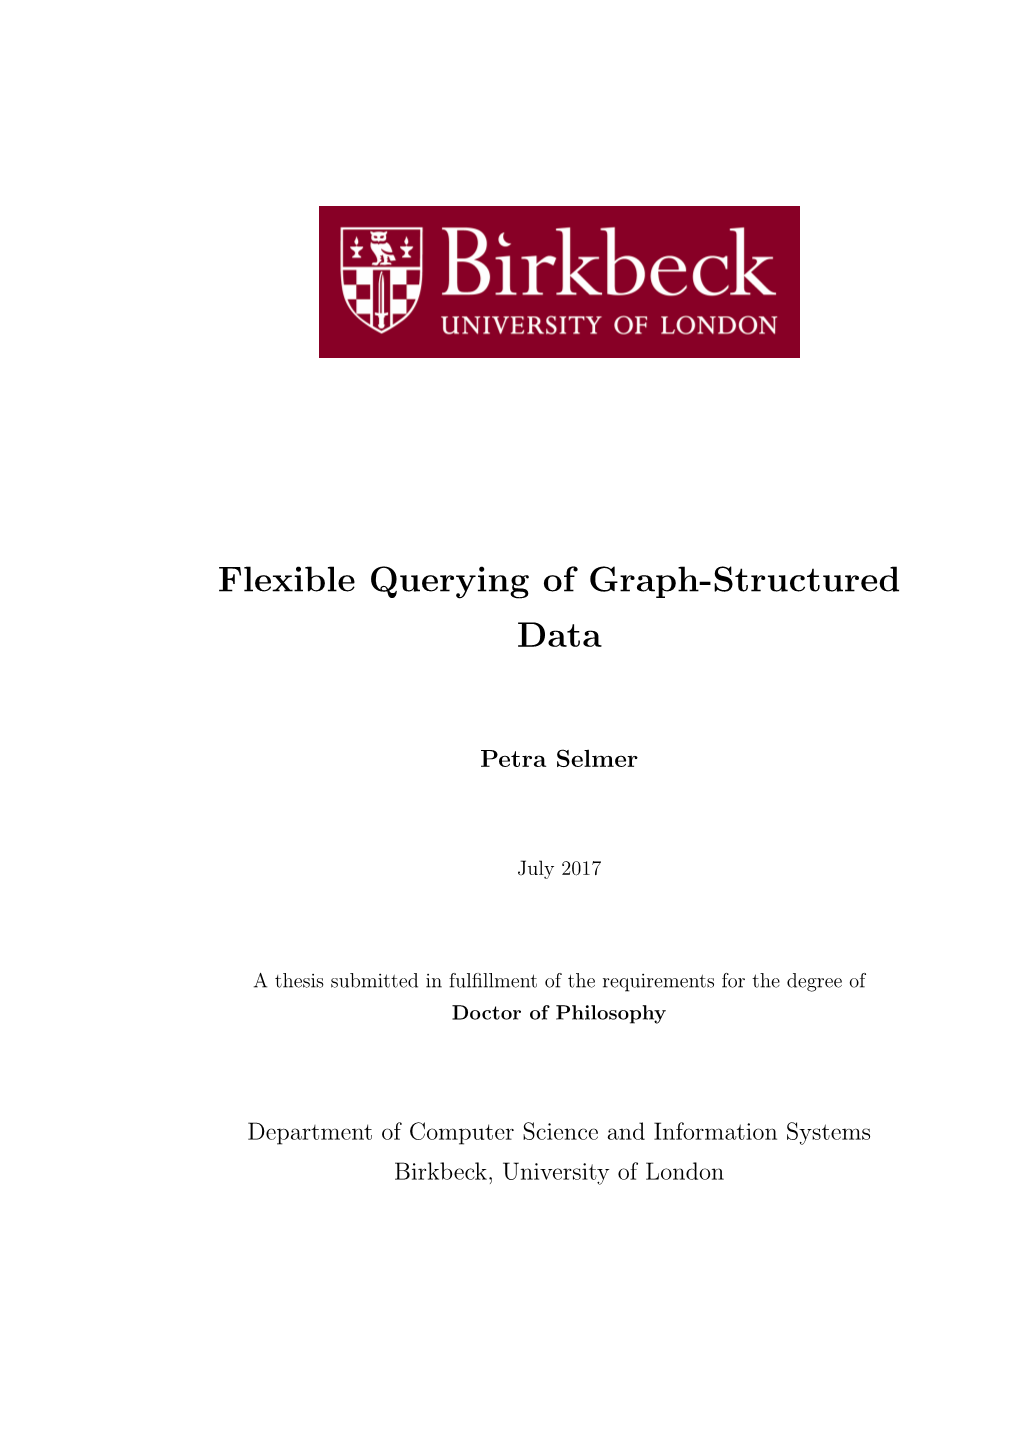 Flexible Querying of Graph-Structured Data